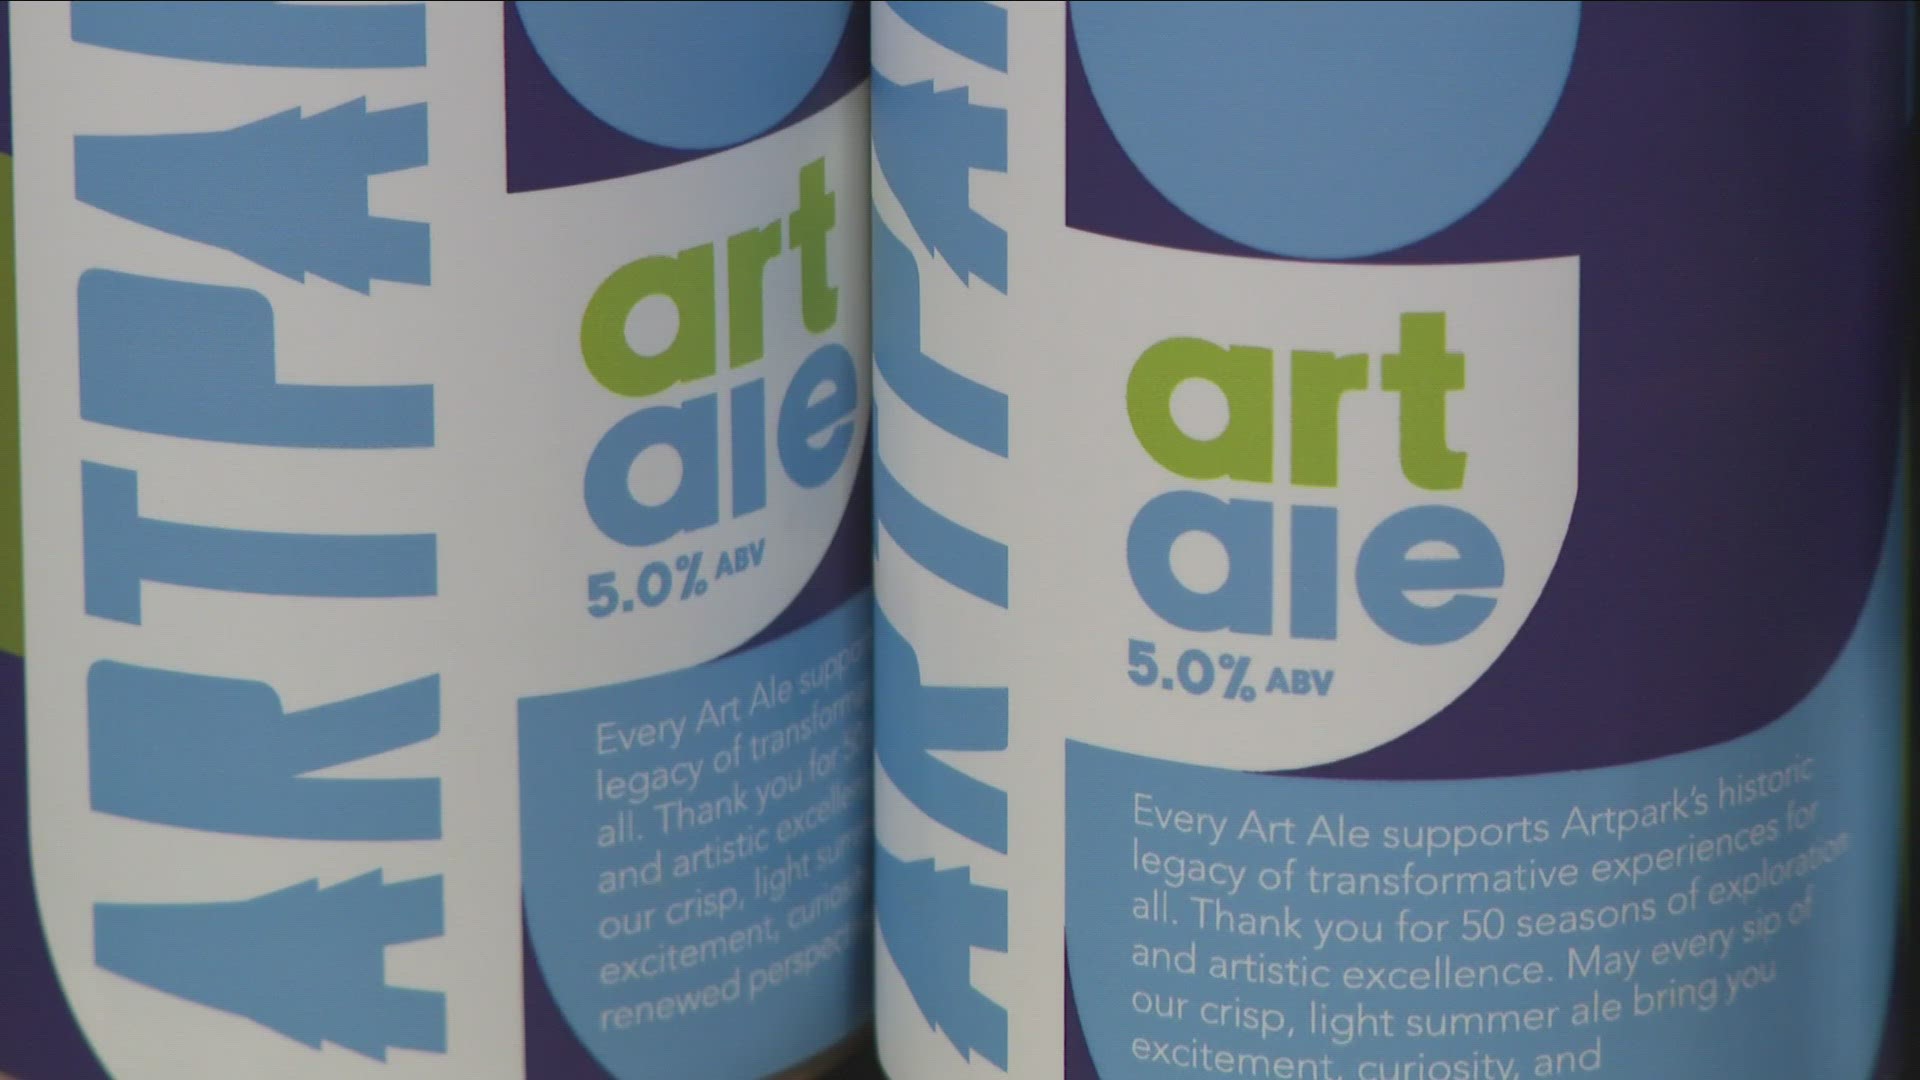 A release party for Art Ale beer was held Saturday at Resurgence Brewing Company.